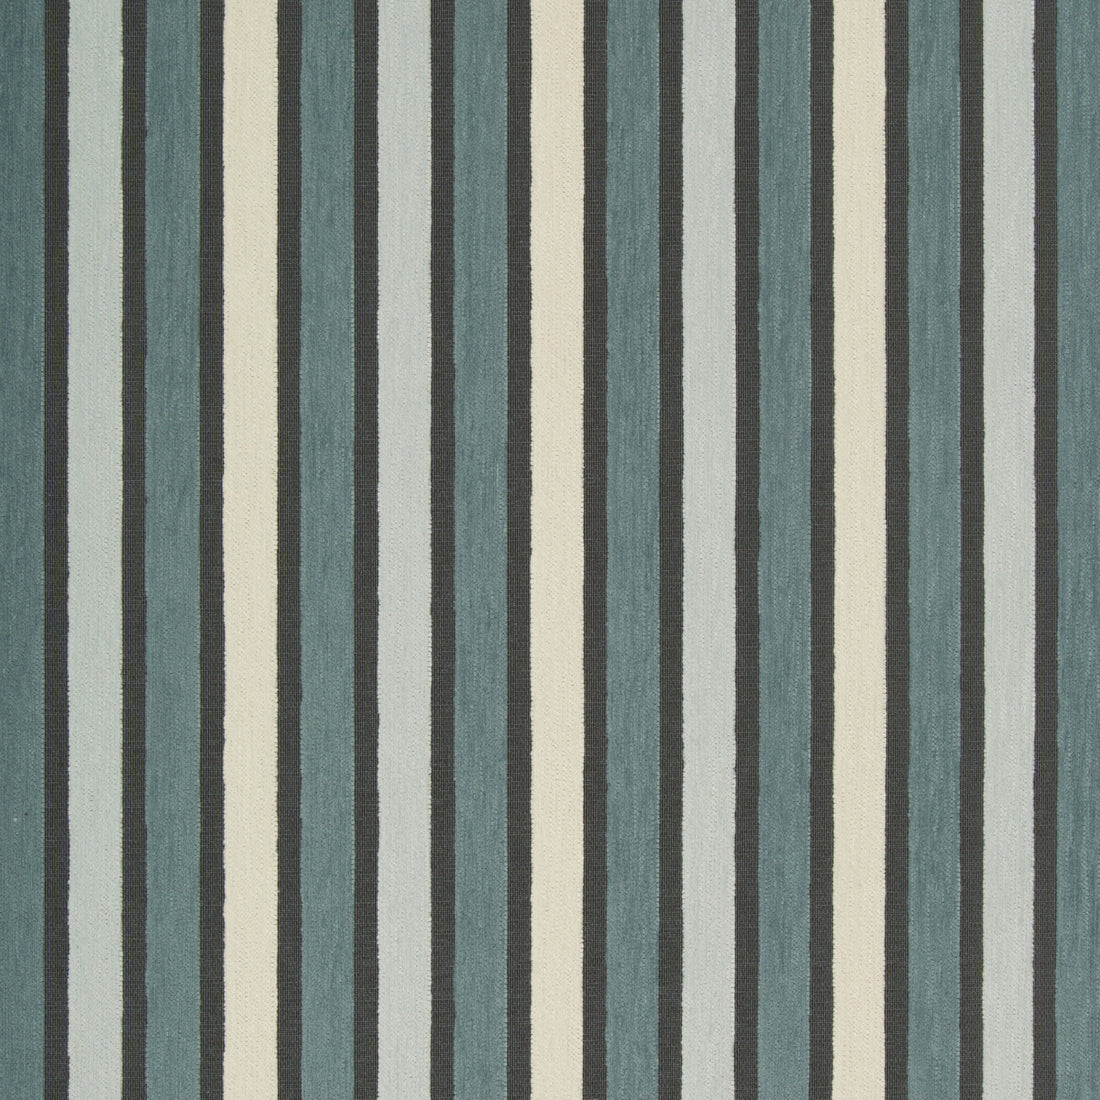 Guru fabric in mineral color - pattern 35083.511.0 - by Kravet Contract in the Gis Crypton collection